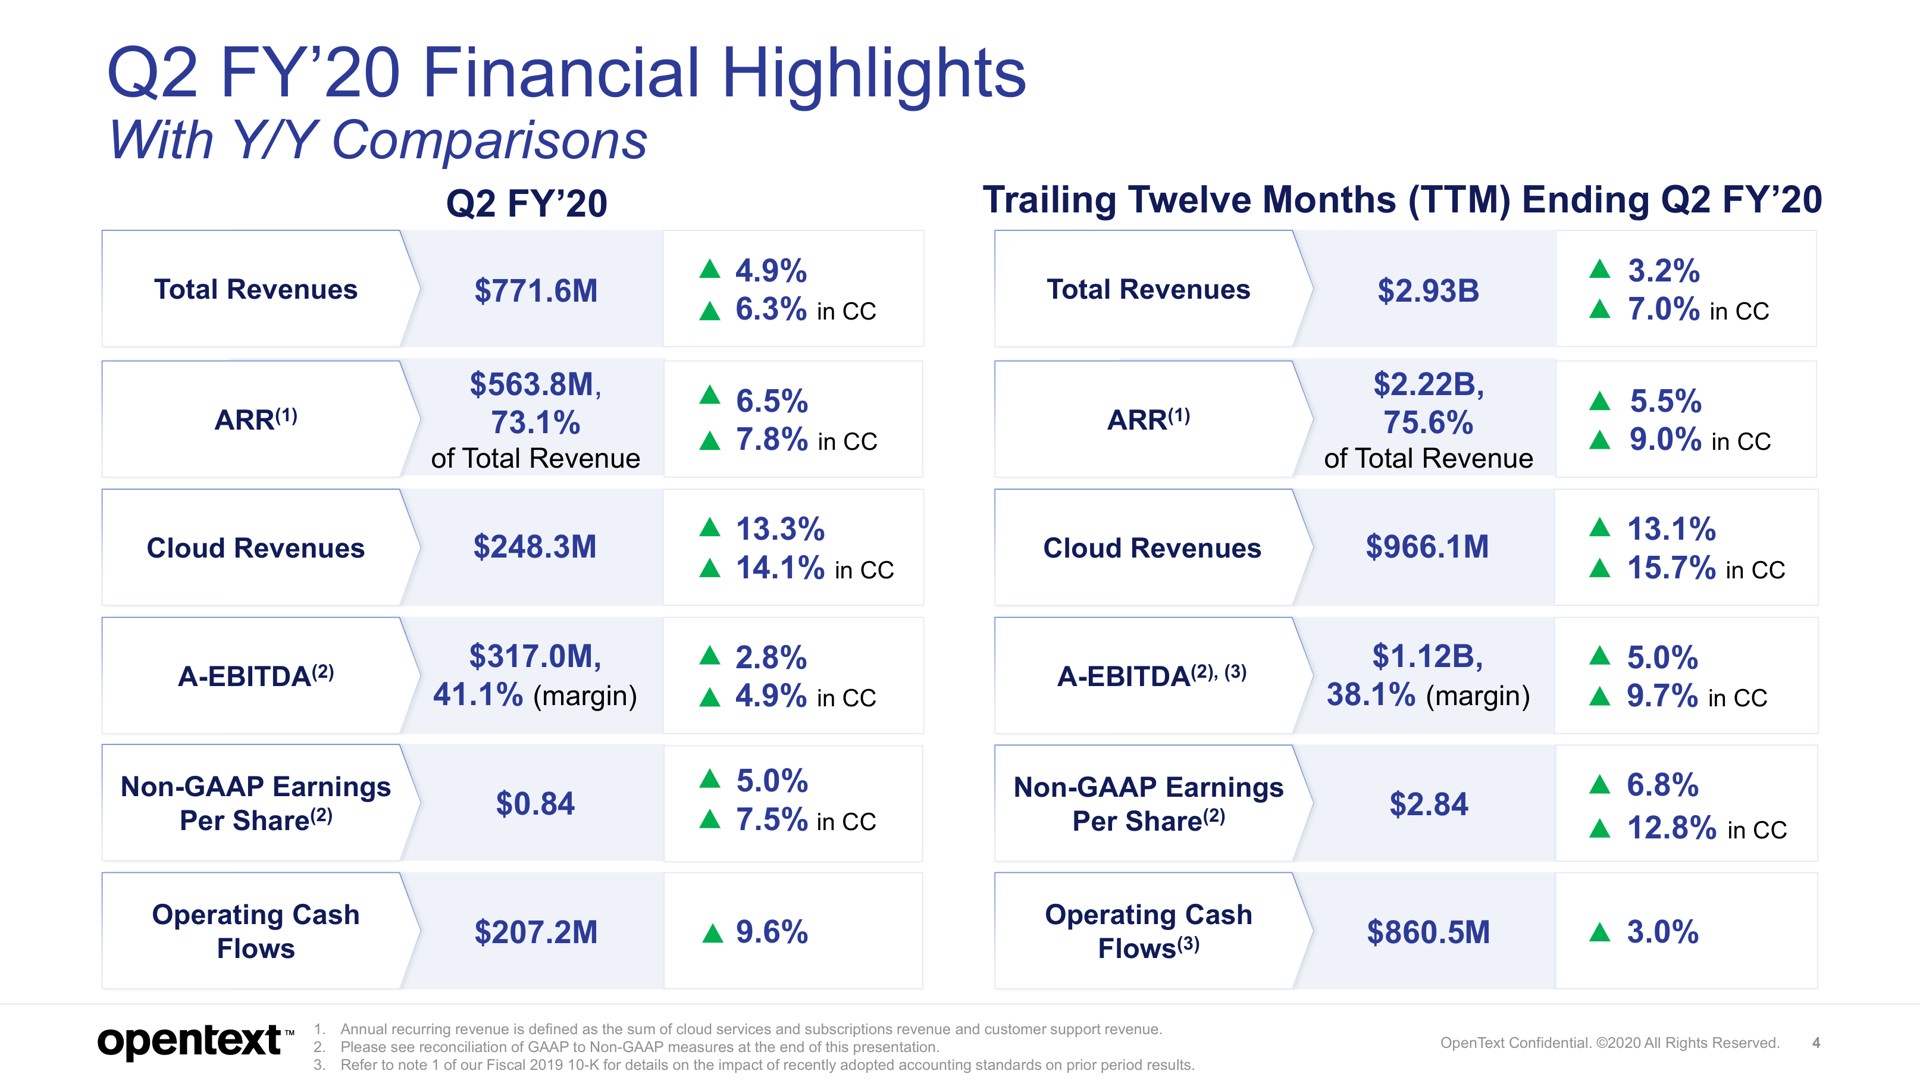 financial highlights with comparisons | OpenText